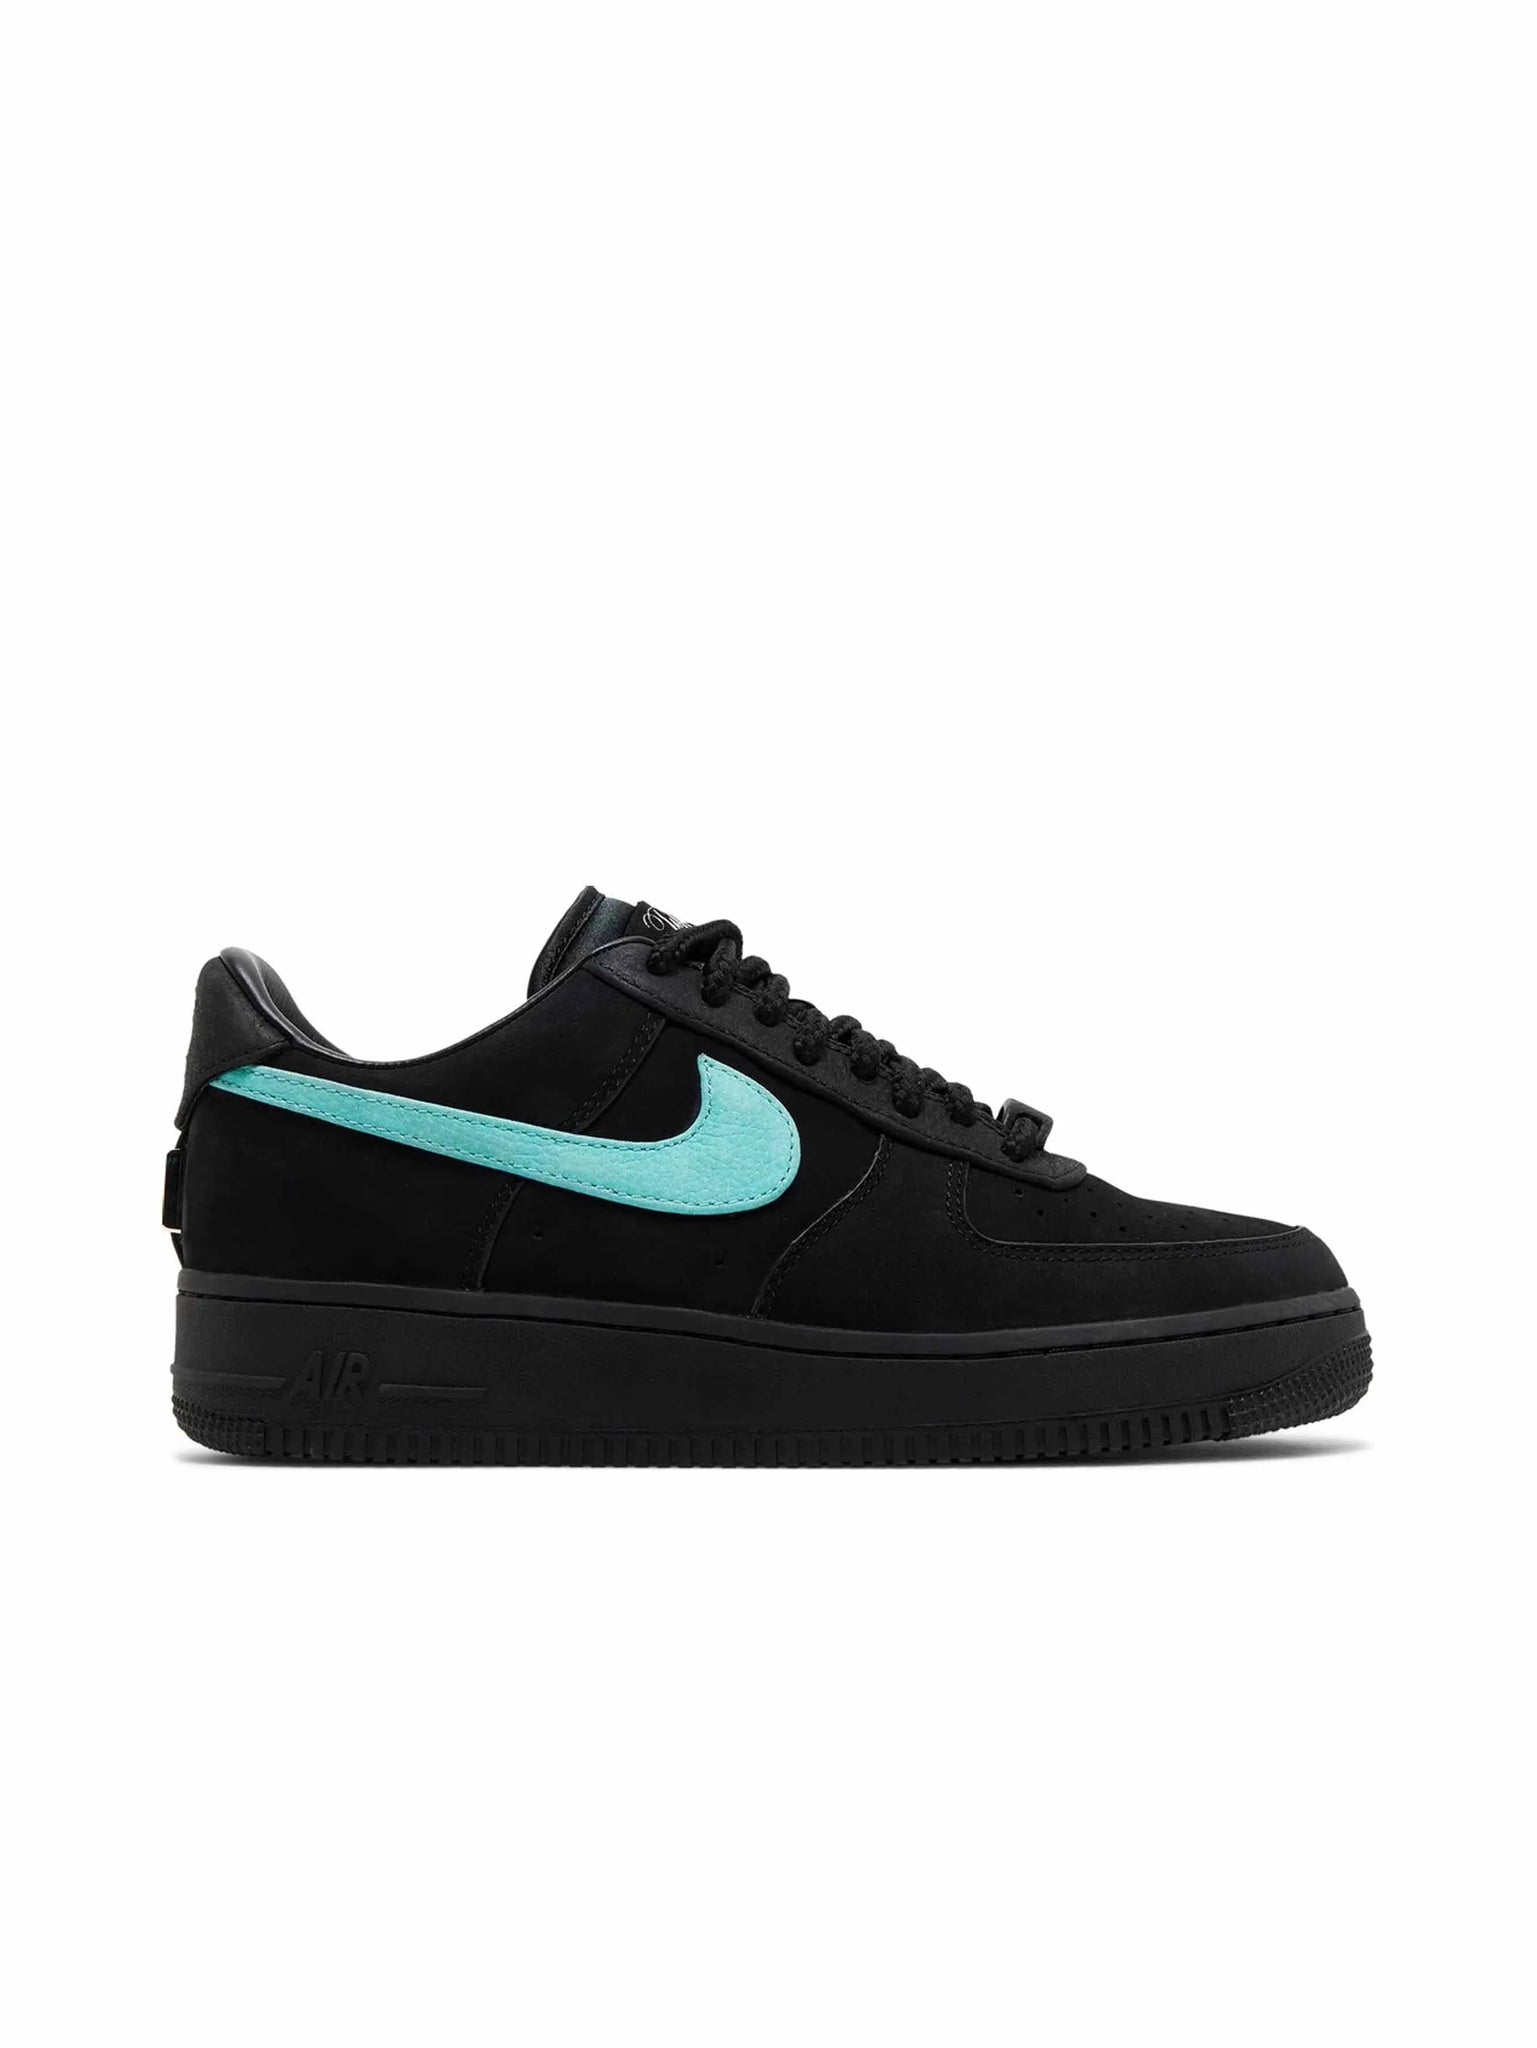 Nike Air Force 1 Low Tiffany & Co. 1837 in Auckland, New Zealand - Shop name